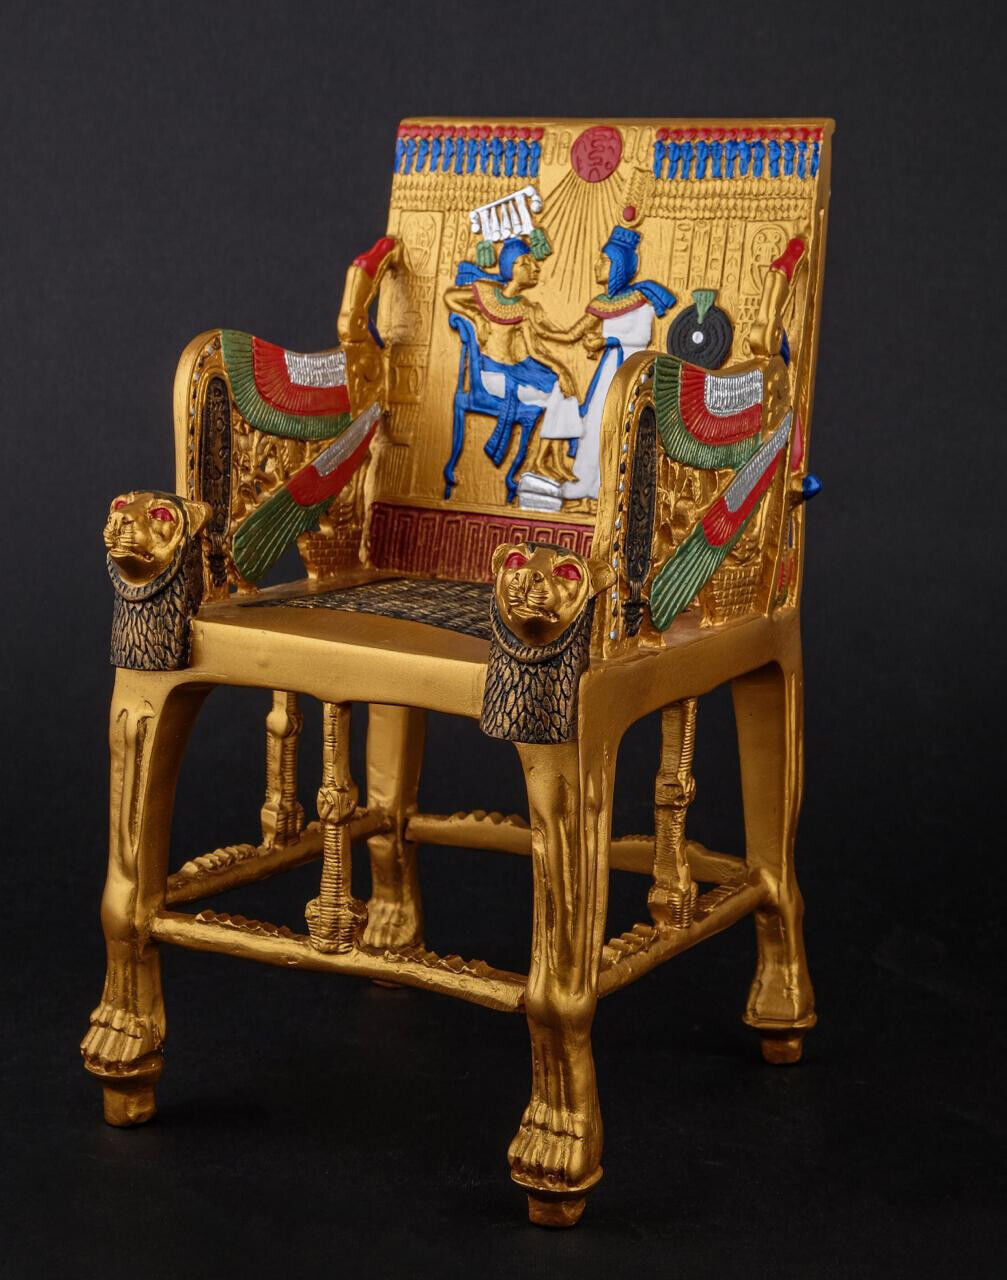 Rare Ancient Egyptian Antique A golden chair for the famous King Tutankhamun BC